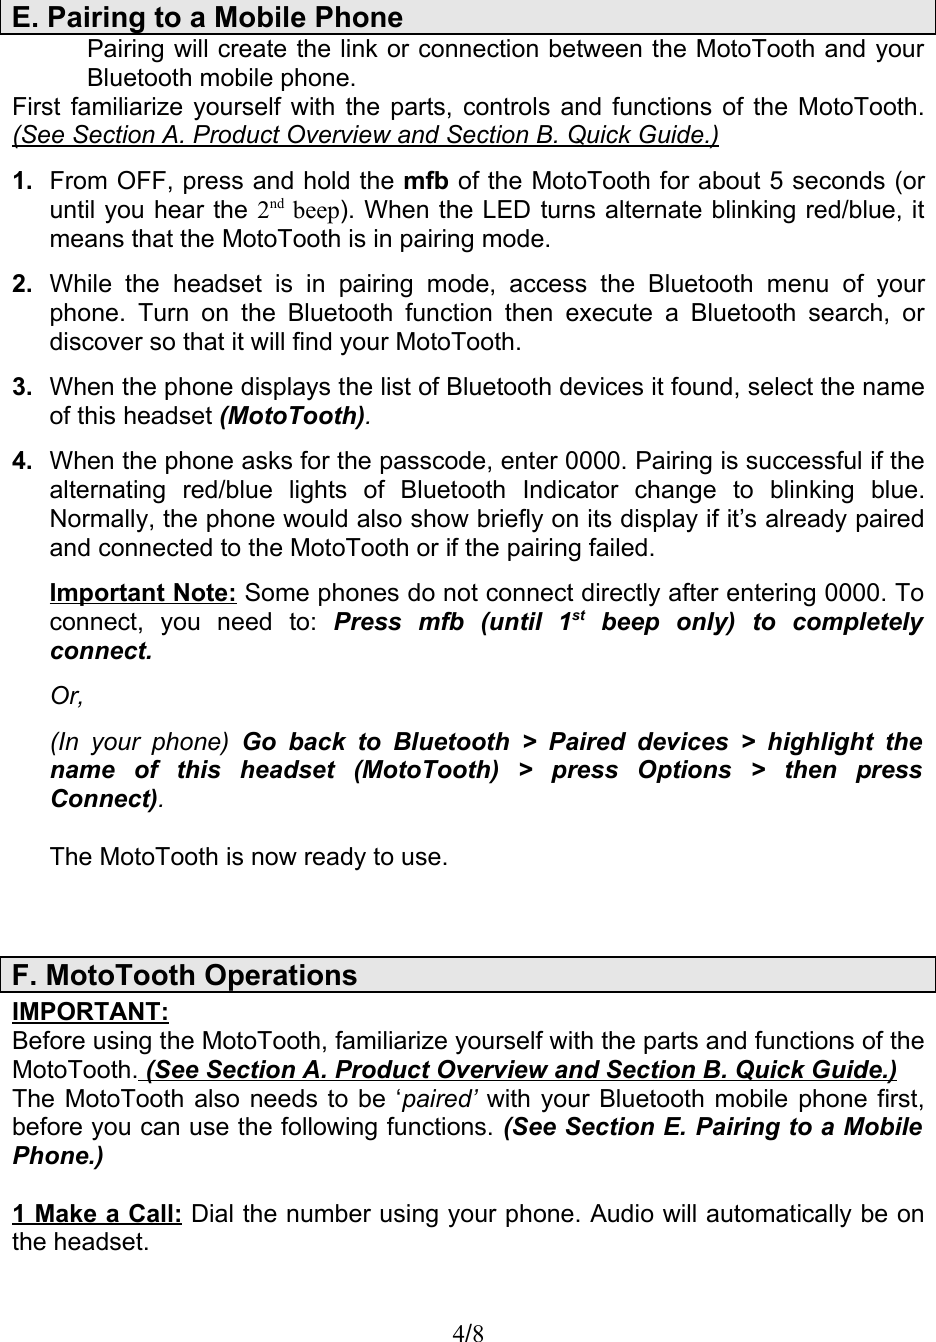 Pairing will create the link or connection between the MotoTooth and your Bluetooth mobile phone.First familiarize yourself with the parts, controls and functions of the MotoTooth. (See Section A. Product Overview and Section B. Quick Guide.)1. From OFF, press and hold the mfb of the MotoTooth for about 5 seconds (or until you hear the 2nd beep). When the LED turns alternate blinking red/blue, it means that the MotoTooth is in pairing mode.2. While   the   headset  is  in  pairing  mode,  access  the  Bluetooth  menu  of   your phone. Turn on the Bluetooth function then  execute a Bluetooth search, or discover so that it will find your MotoTooth. 3. When the phone displays the list of Bluetooth devices it found, select the name of this headset (MotoTooth).4. When the phone asks for the passcode, enter 0000. Pairing is successful if the alternating   red/blue   lights   of   Bluetooth   Indicator   change   to   blinking   blue. Normally, the phone would also show briefly on its display if it’s already paired and connected to the MotoTooth or if the pairing failed. Important Note: Some phones do not connect directly after entering 0000. To connect,   you   need   to: Press   mfb   (until   1st  beep   only)   to   completely connect. Or,(In your  phone)  Go back to  Bluetooth &gt; Paired  devices  &gt; highlight the name   of   this   headset   (MotoTooth)   &gt;   press   Options   &gt;   then   press  Connect).              The MotoTooth is now ready to use.IMPORTANT:Before using the MotoTooth, familiarize yourself with the parts and functions of the MotoTooth.   (See Section A. Product Overview and Section B. Quick Guide.)  The MotoTooth also needs to be ‘paired’  with your Bluetooth mobile phone first, before you can use the following functions. (See Section E. Pairing to a Mobile  Phone.)1 Make a Call: Dial the number using your phone. Audio will automatically be on the headset.4/8E. Pairing to a Mobile PhoneF. MotoTooth Operations